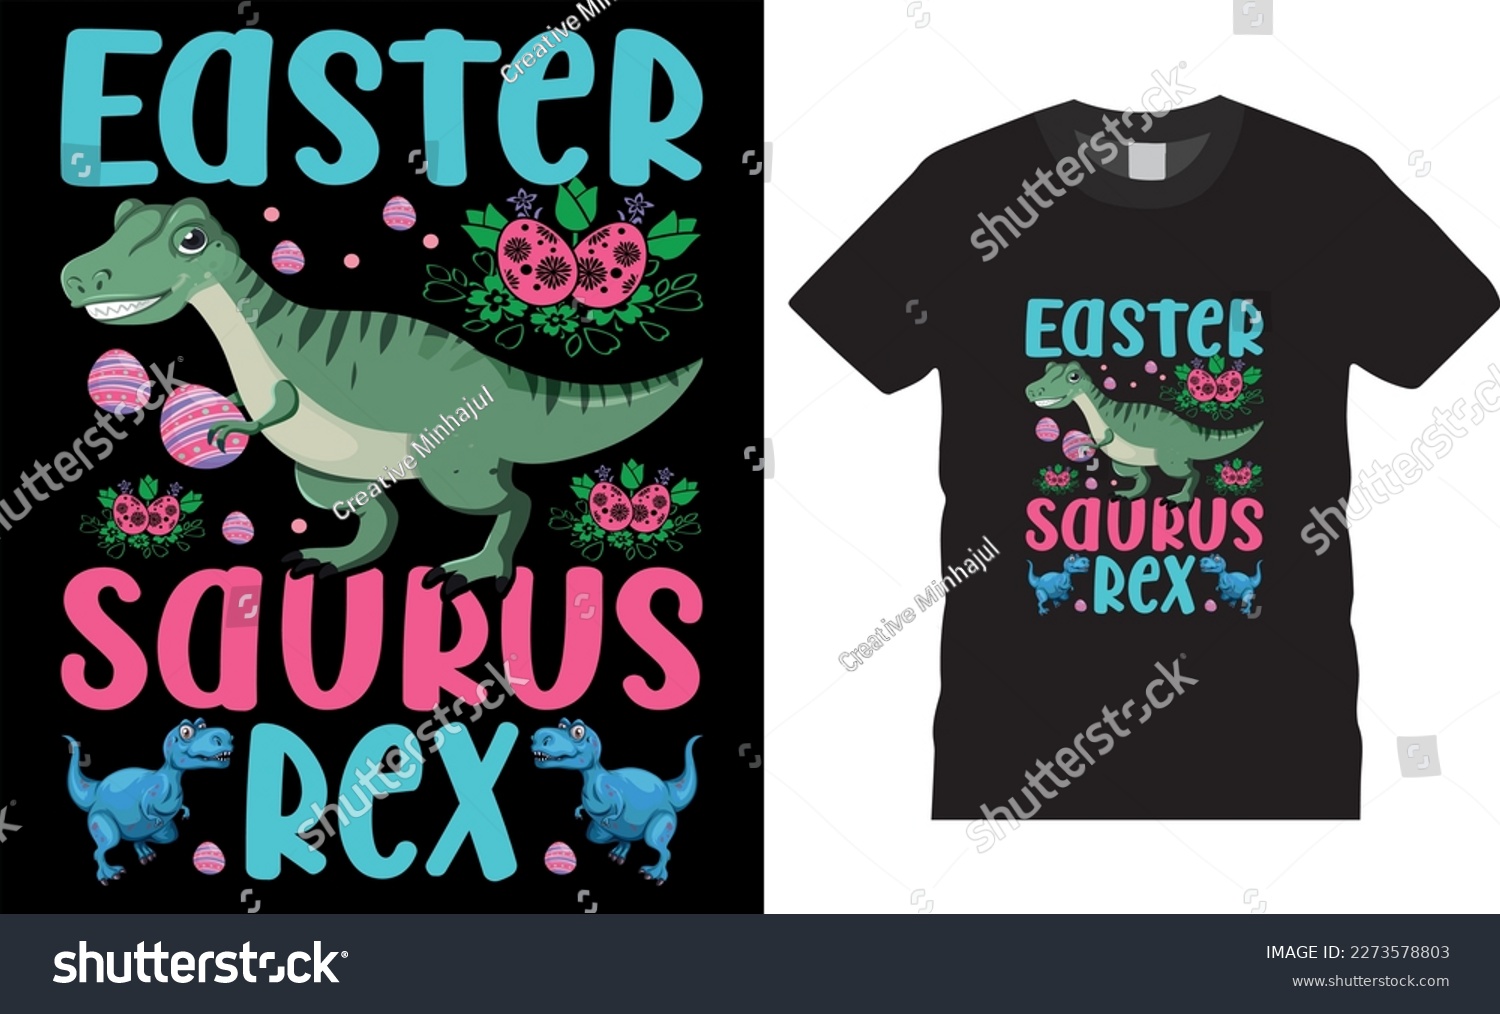 SVG of Happy easter rabbit, bunny tshirt vector design template.easter saurus rex t-shirt design.Ready to print for apparel, poster, mug and greeting plate illustration. svg